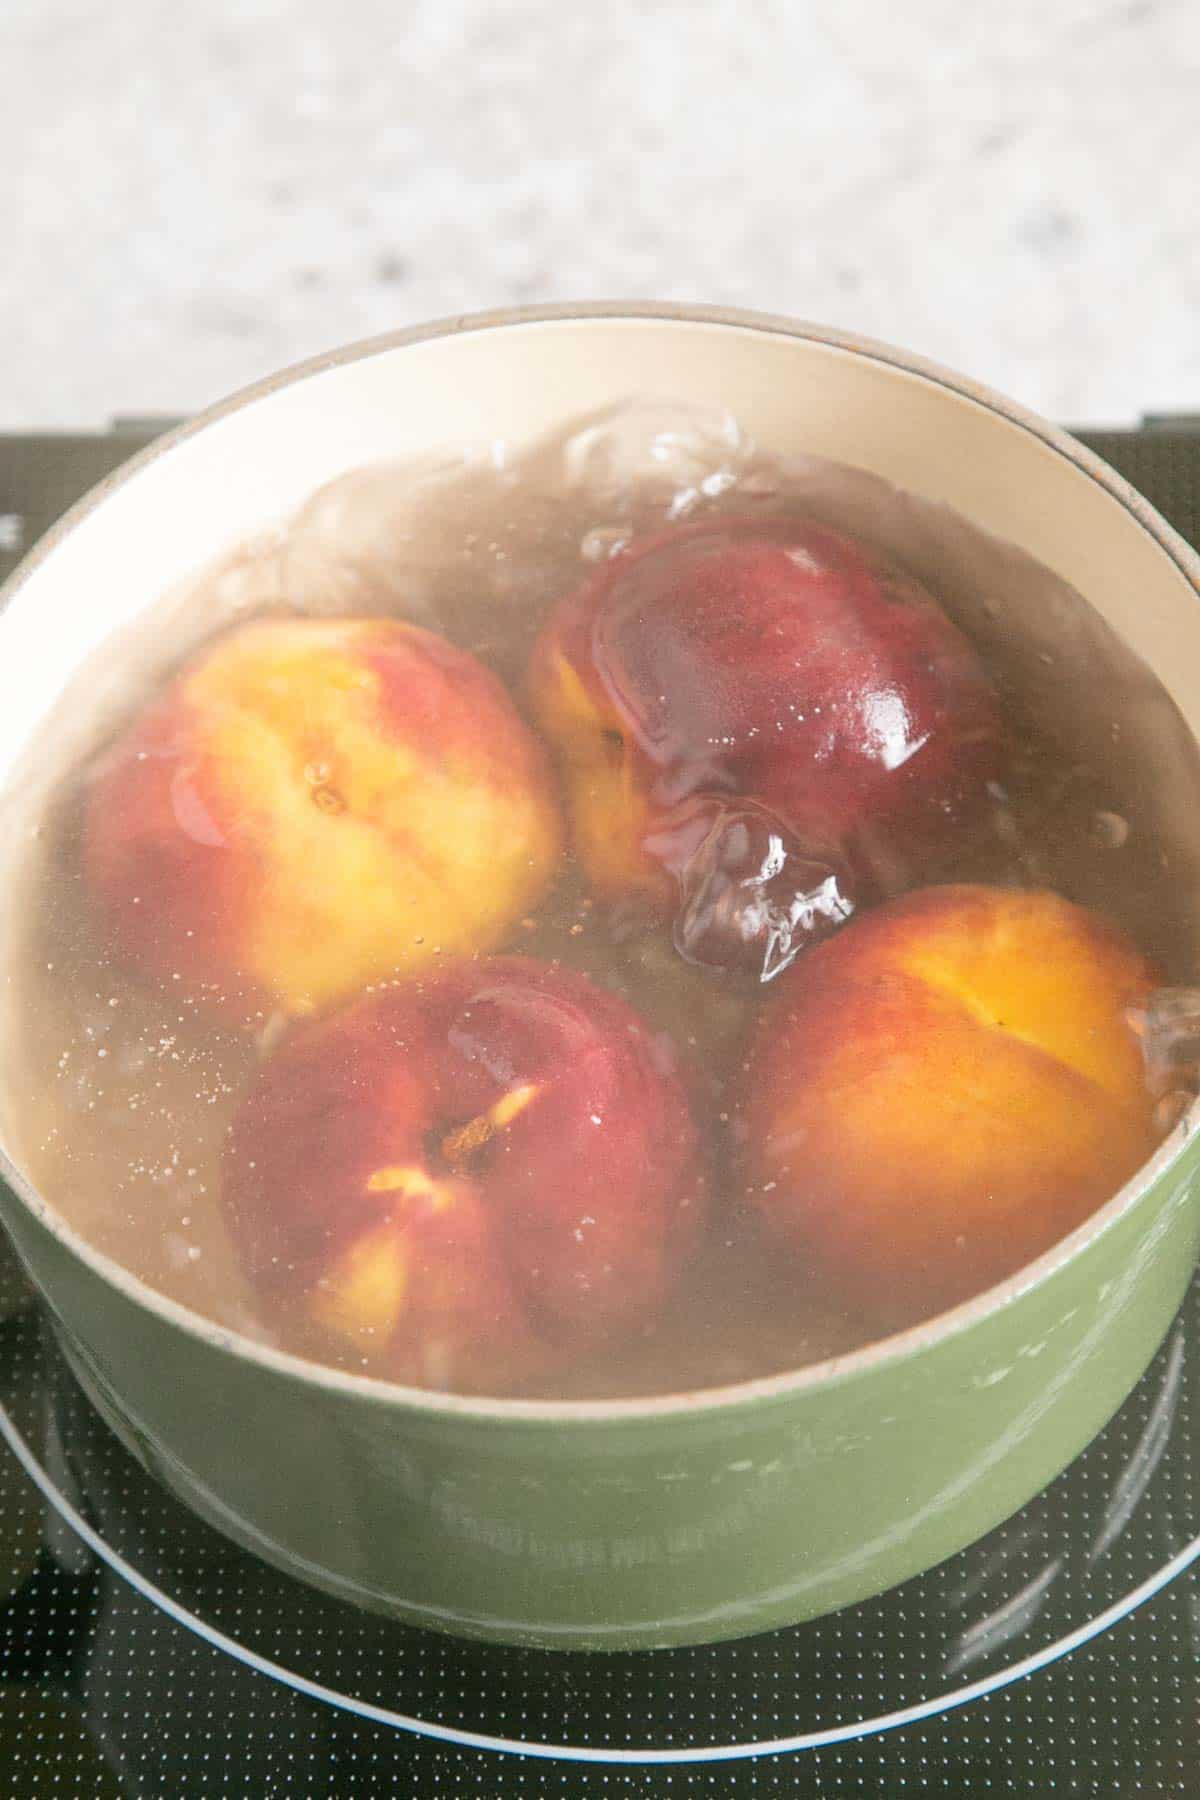 The peaches submerged in boiling water.